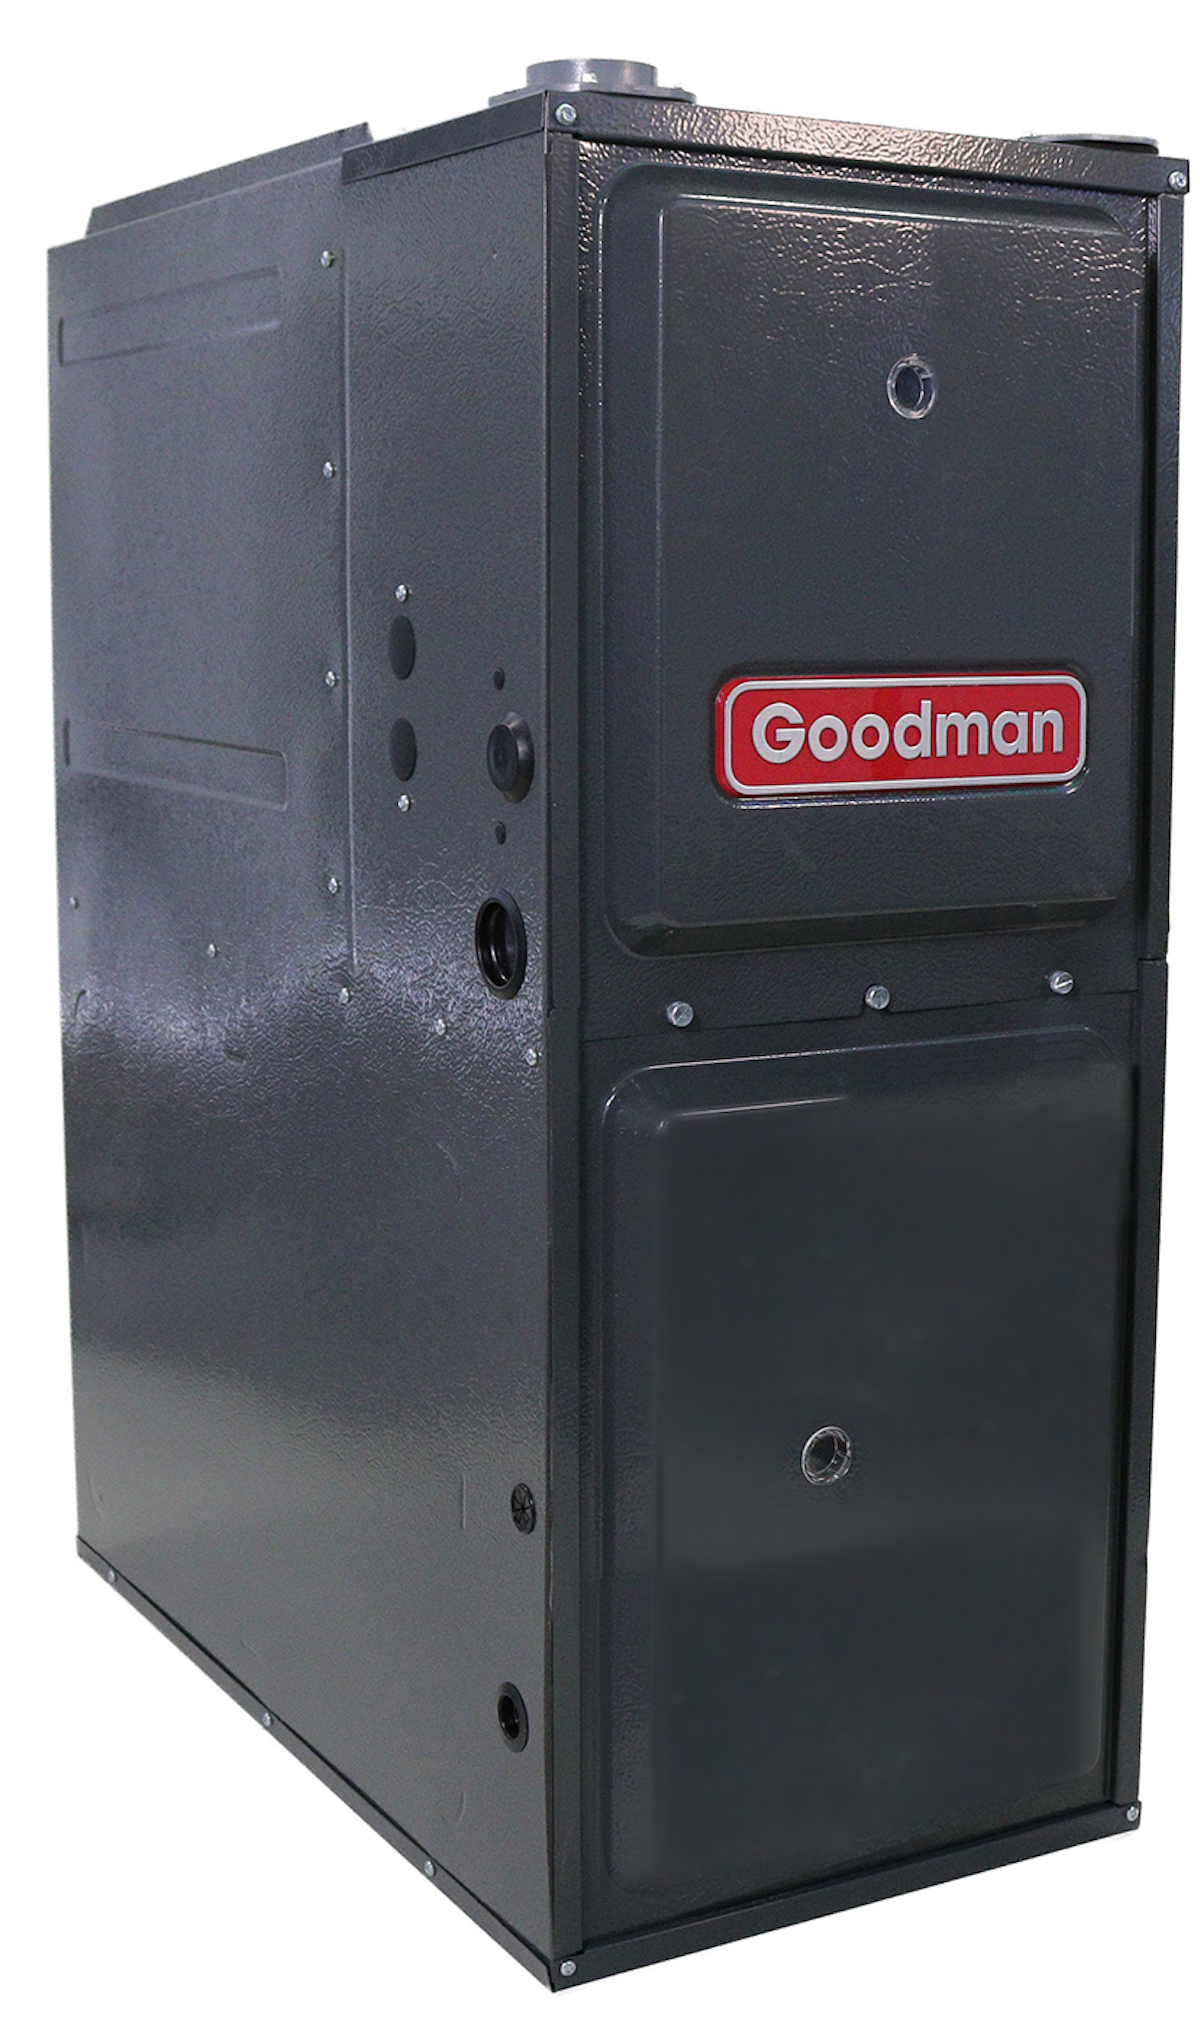 goodman-releases-14-in-wide-furnace-for-tight-spaces-contracting